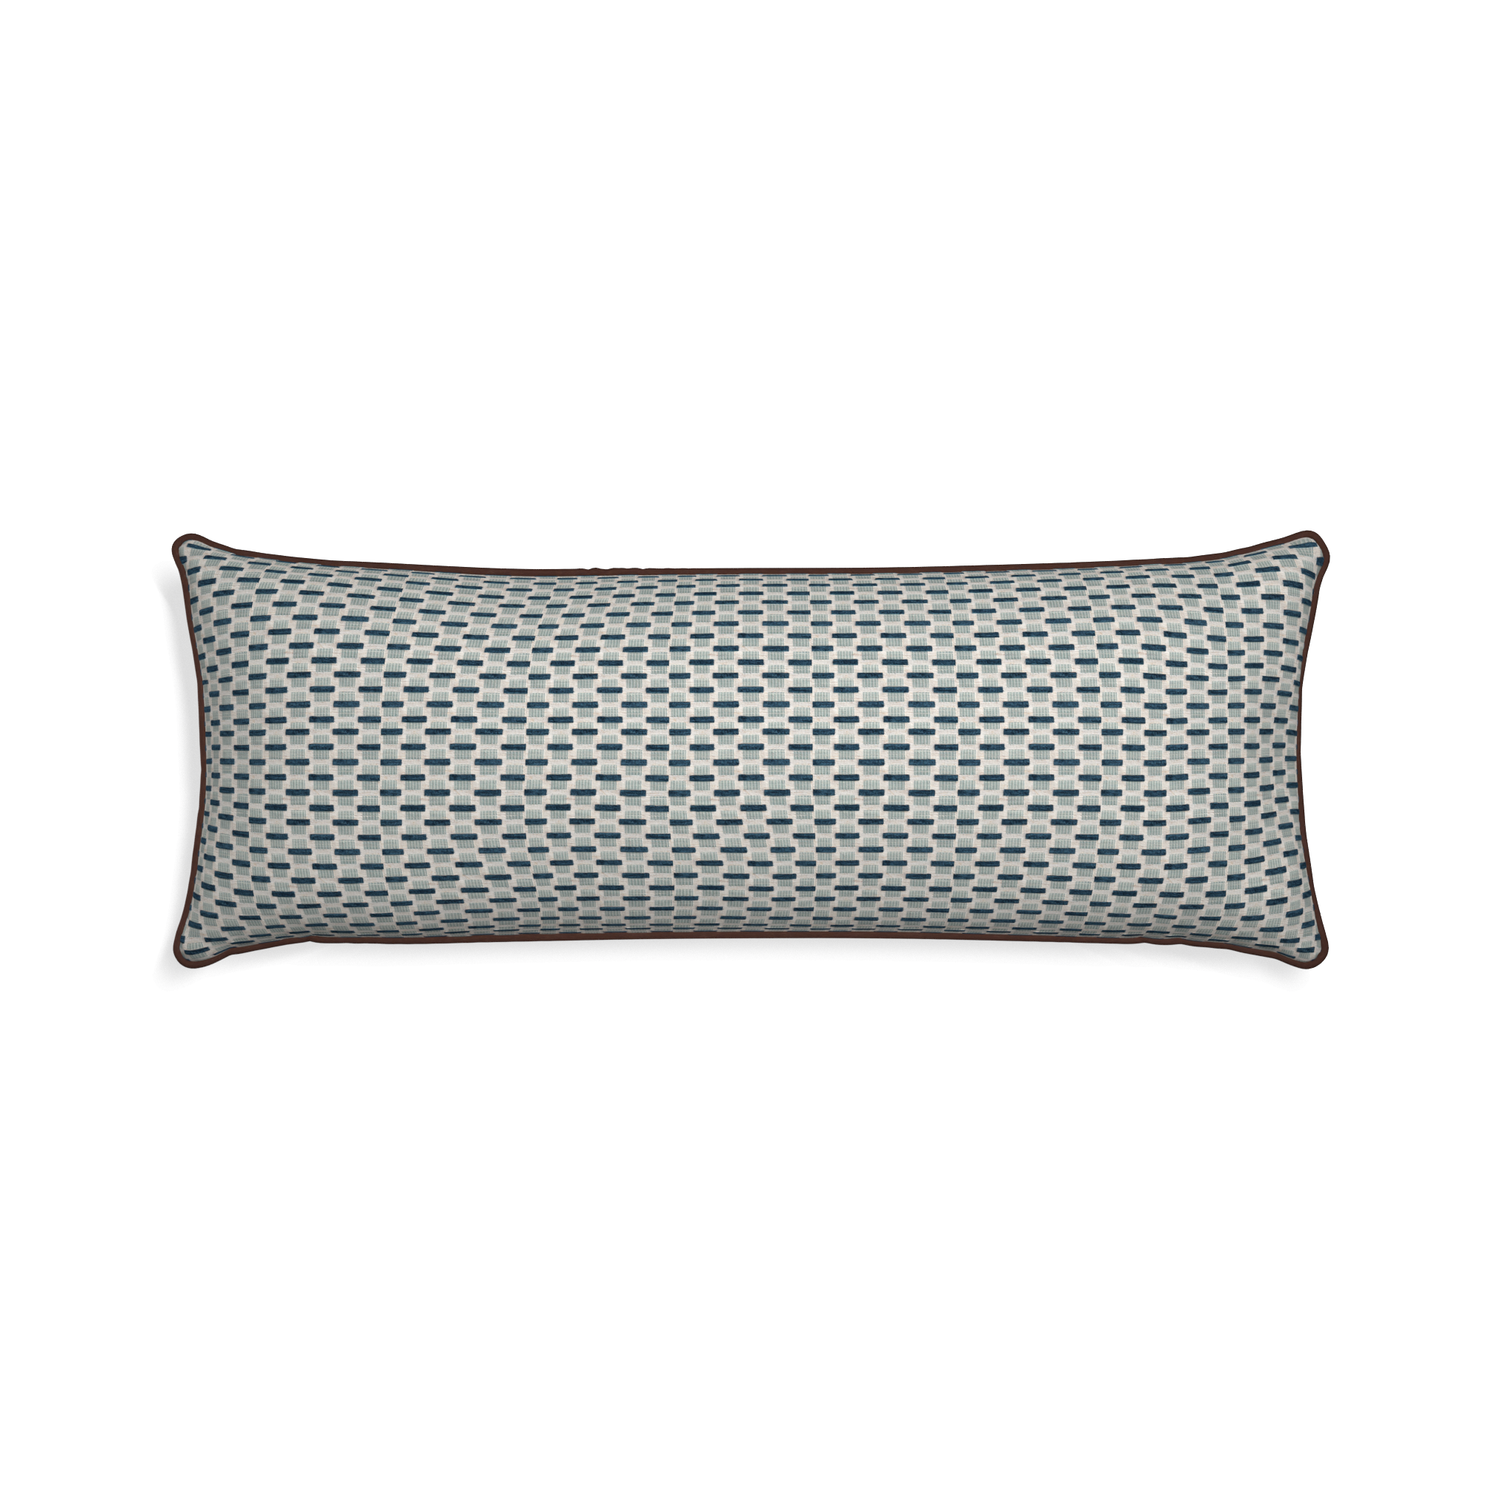 Xl-lumbar willow amalfi custom blue geometric chenillepillow with w piping on white background